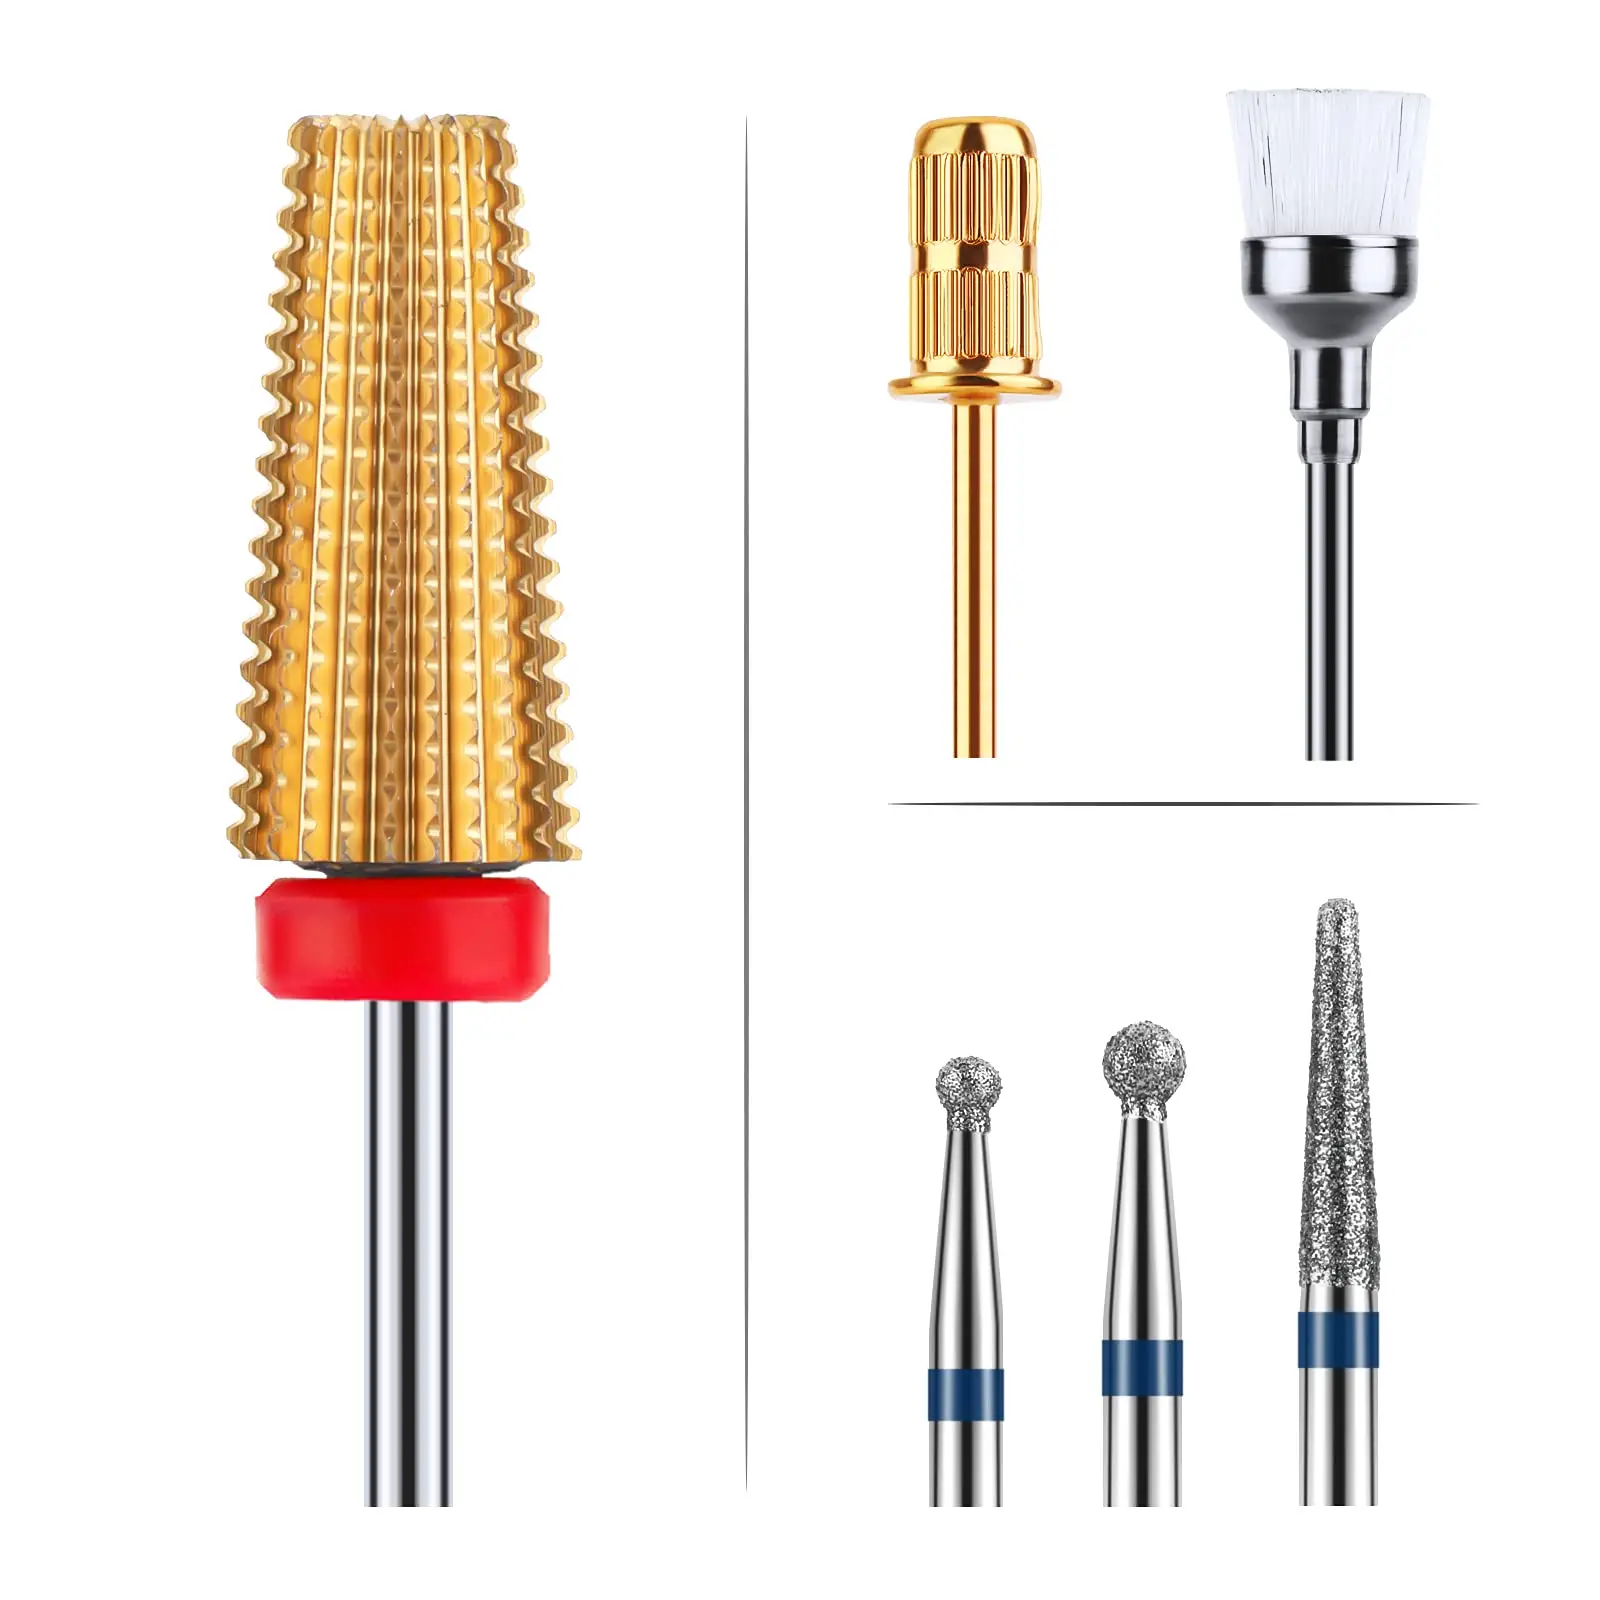 5 In 1 Nail Drill Bits Carbide Tapered Barrel Milling Cutter  3/32